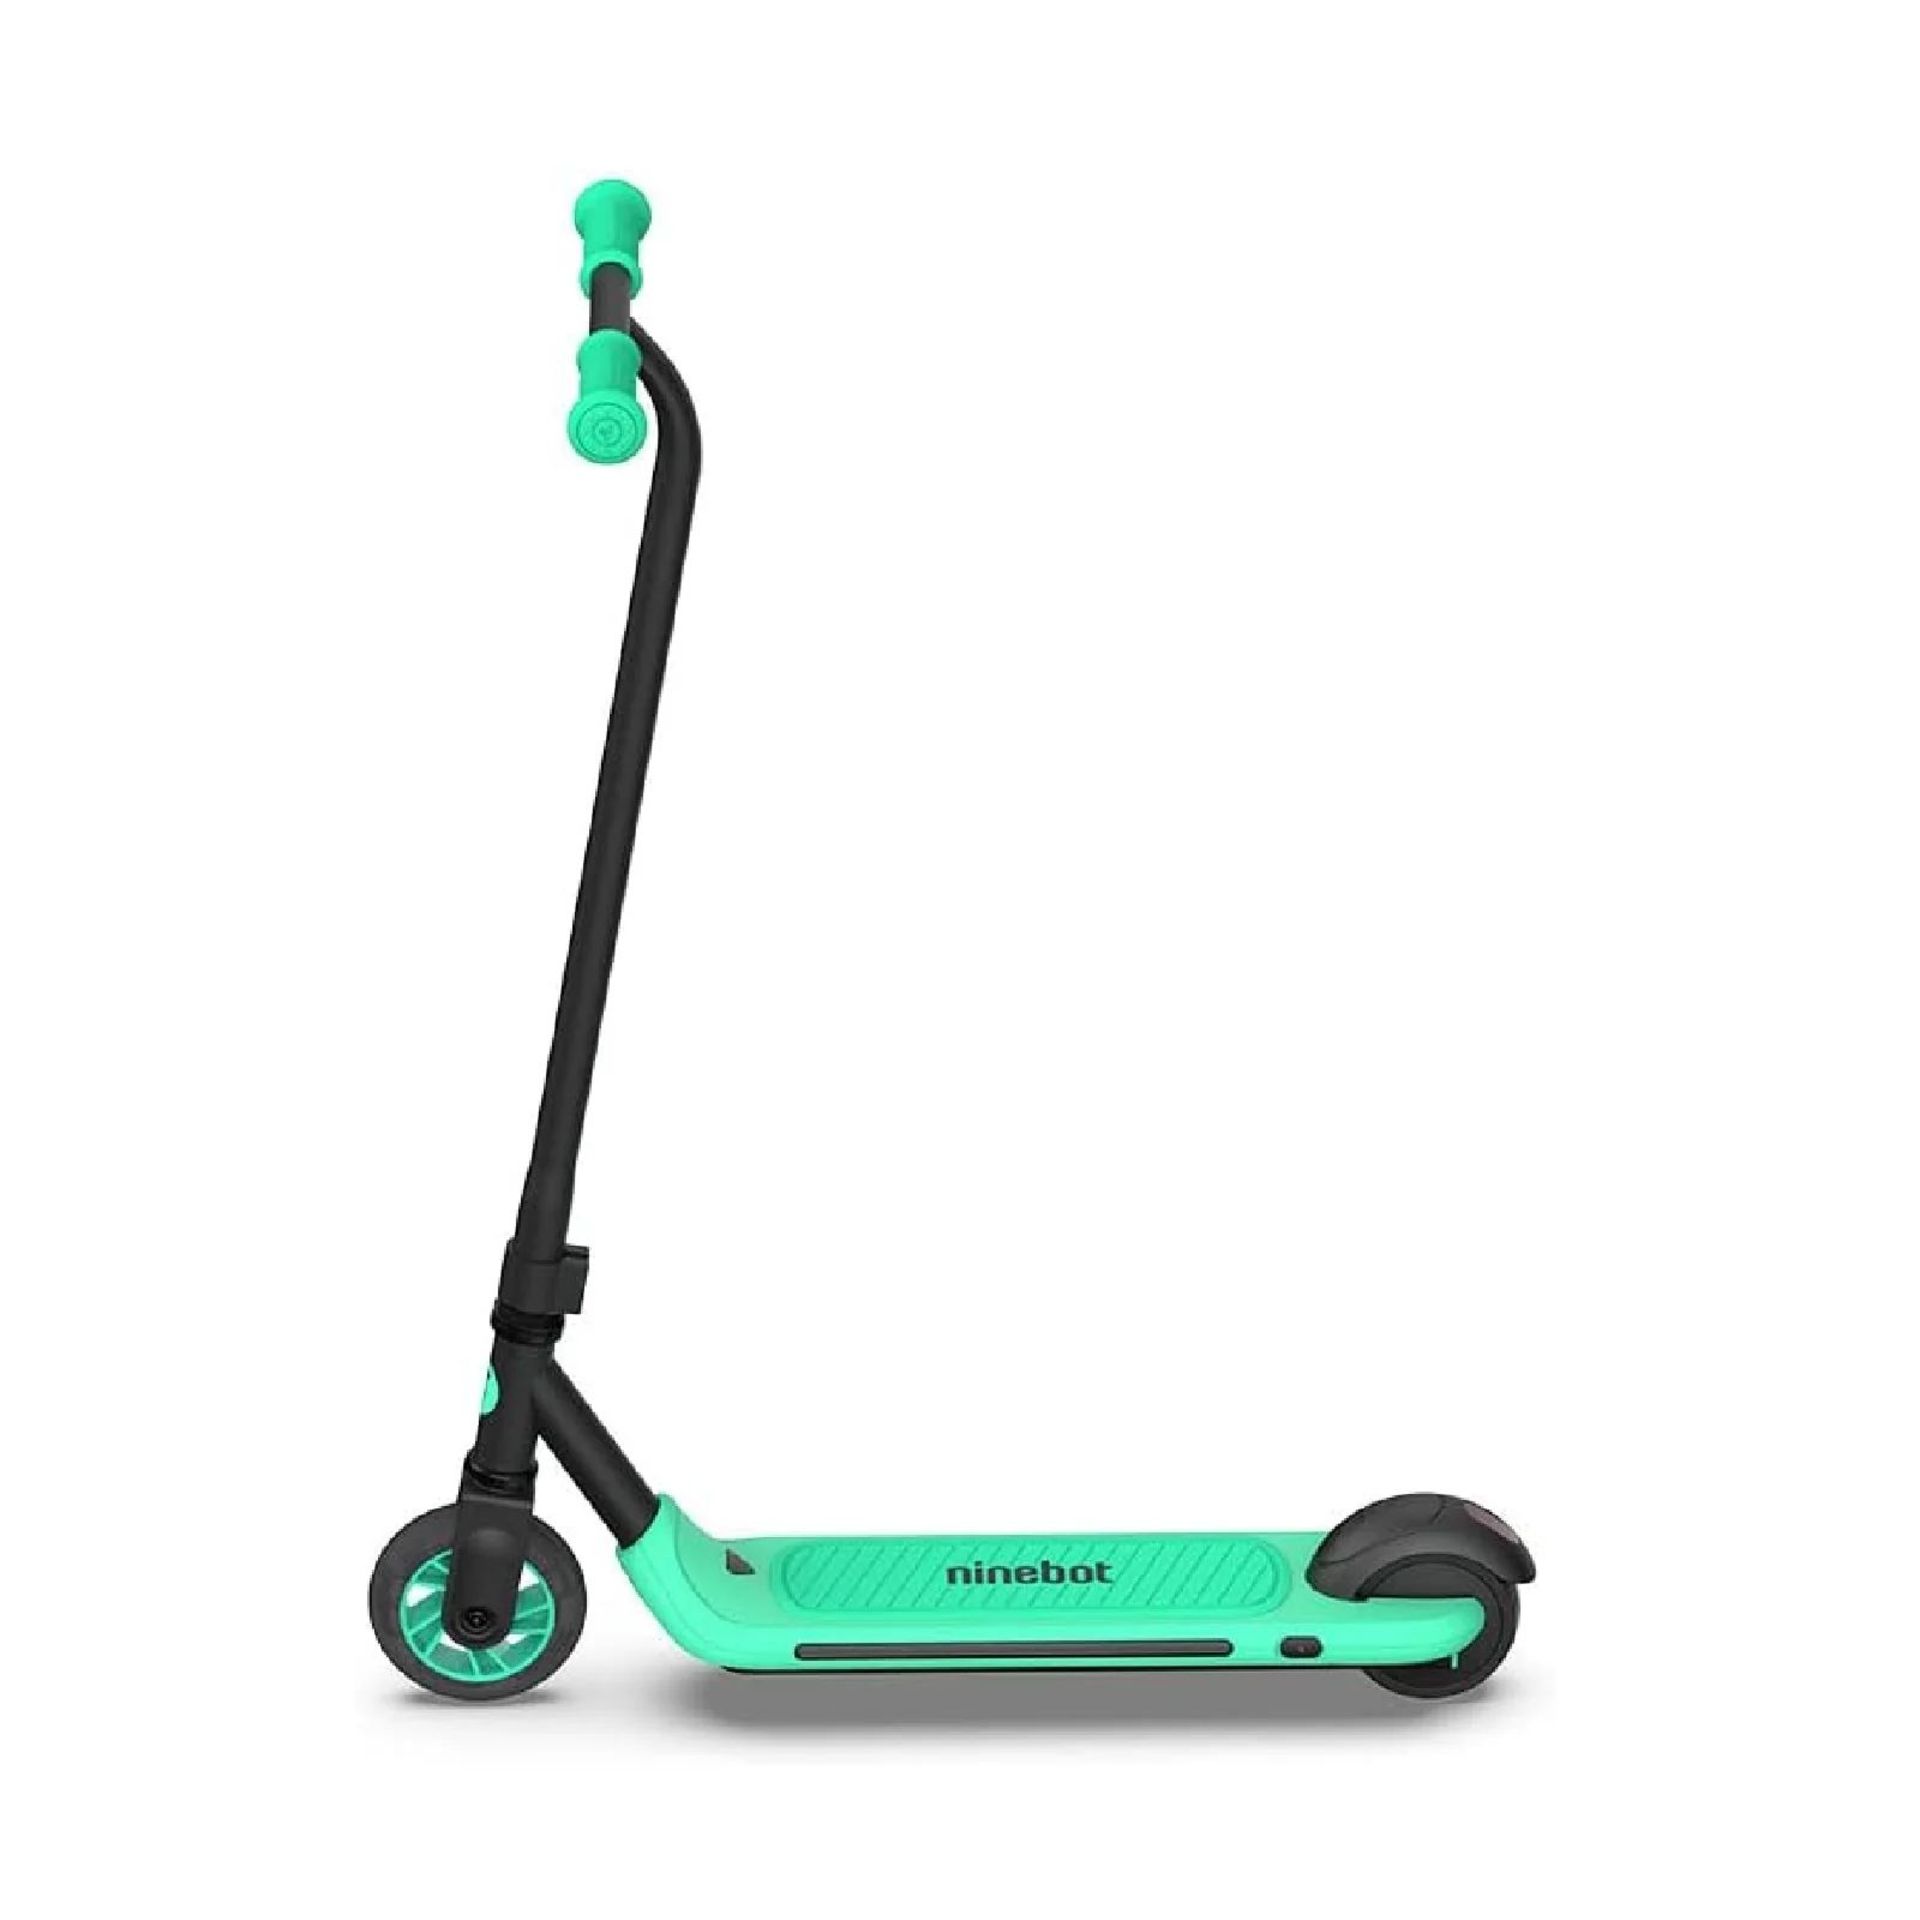 UNITS - SEGWAY NINEBOT ELECTRIC ASSIST E-KICK SCOOTER (FACTORY RECERTIFIED 30 DAY WARRANTY INCLUDED) - Image 2 of 3